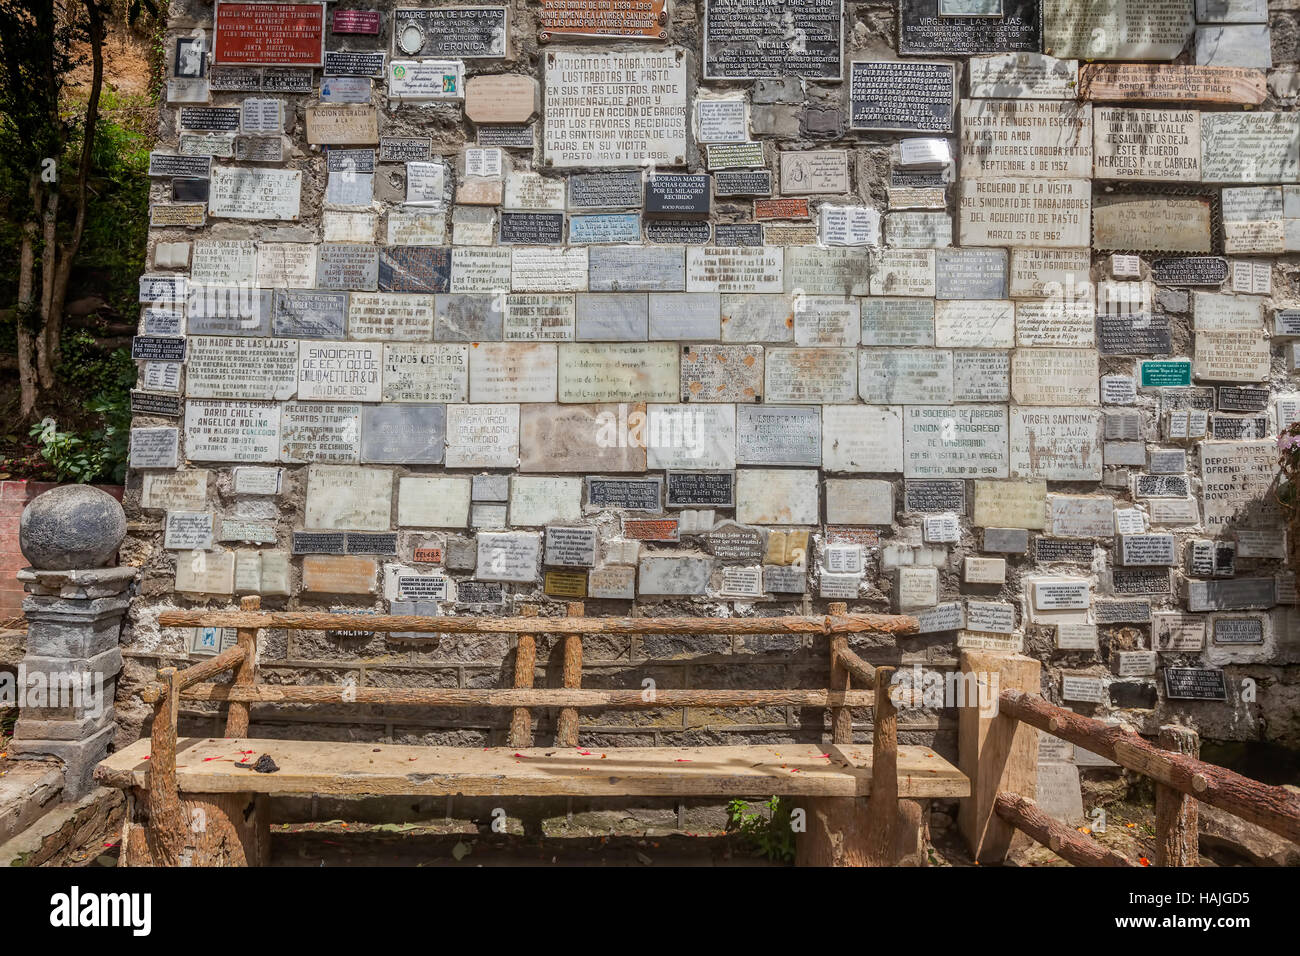 Ipiales, Ecuador - 11 September 2016: Marble Plates With The Religious Texts On Las Lajas Sanctuary Wall, Built In A Gorge In Ipiales, Colombia Stock Photo